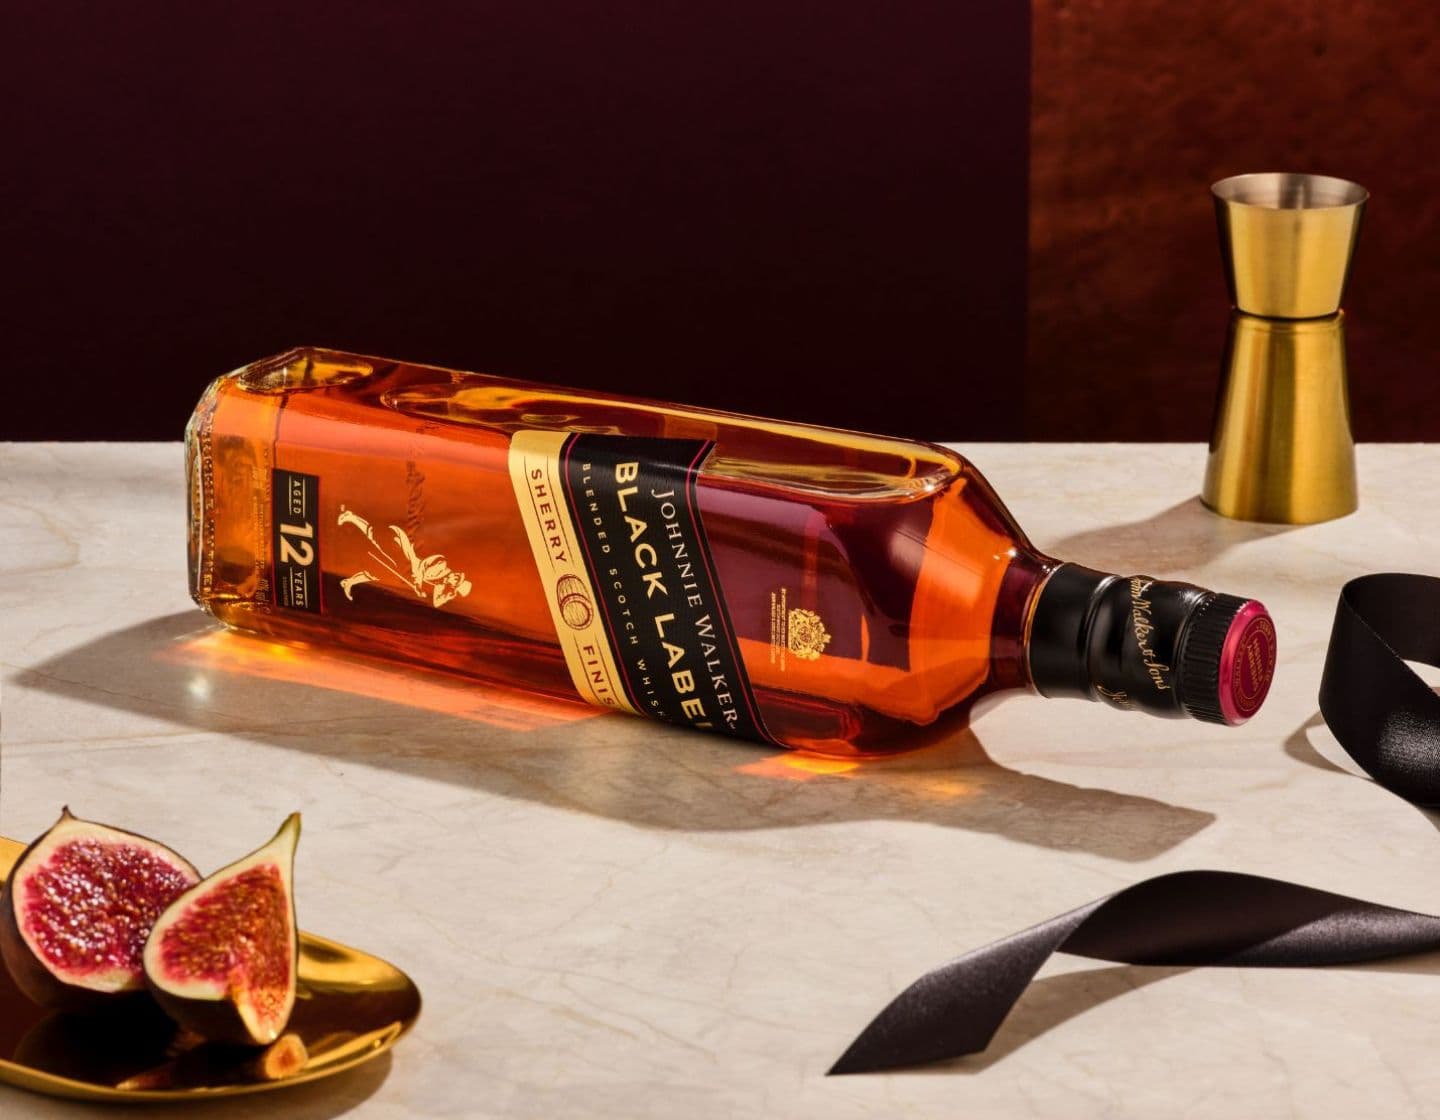 Johnnie Walker Black Label bottle and gold jigger on a white table